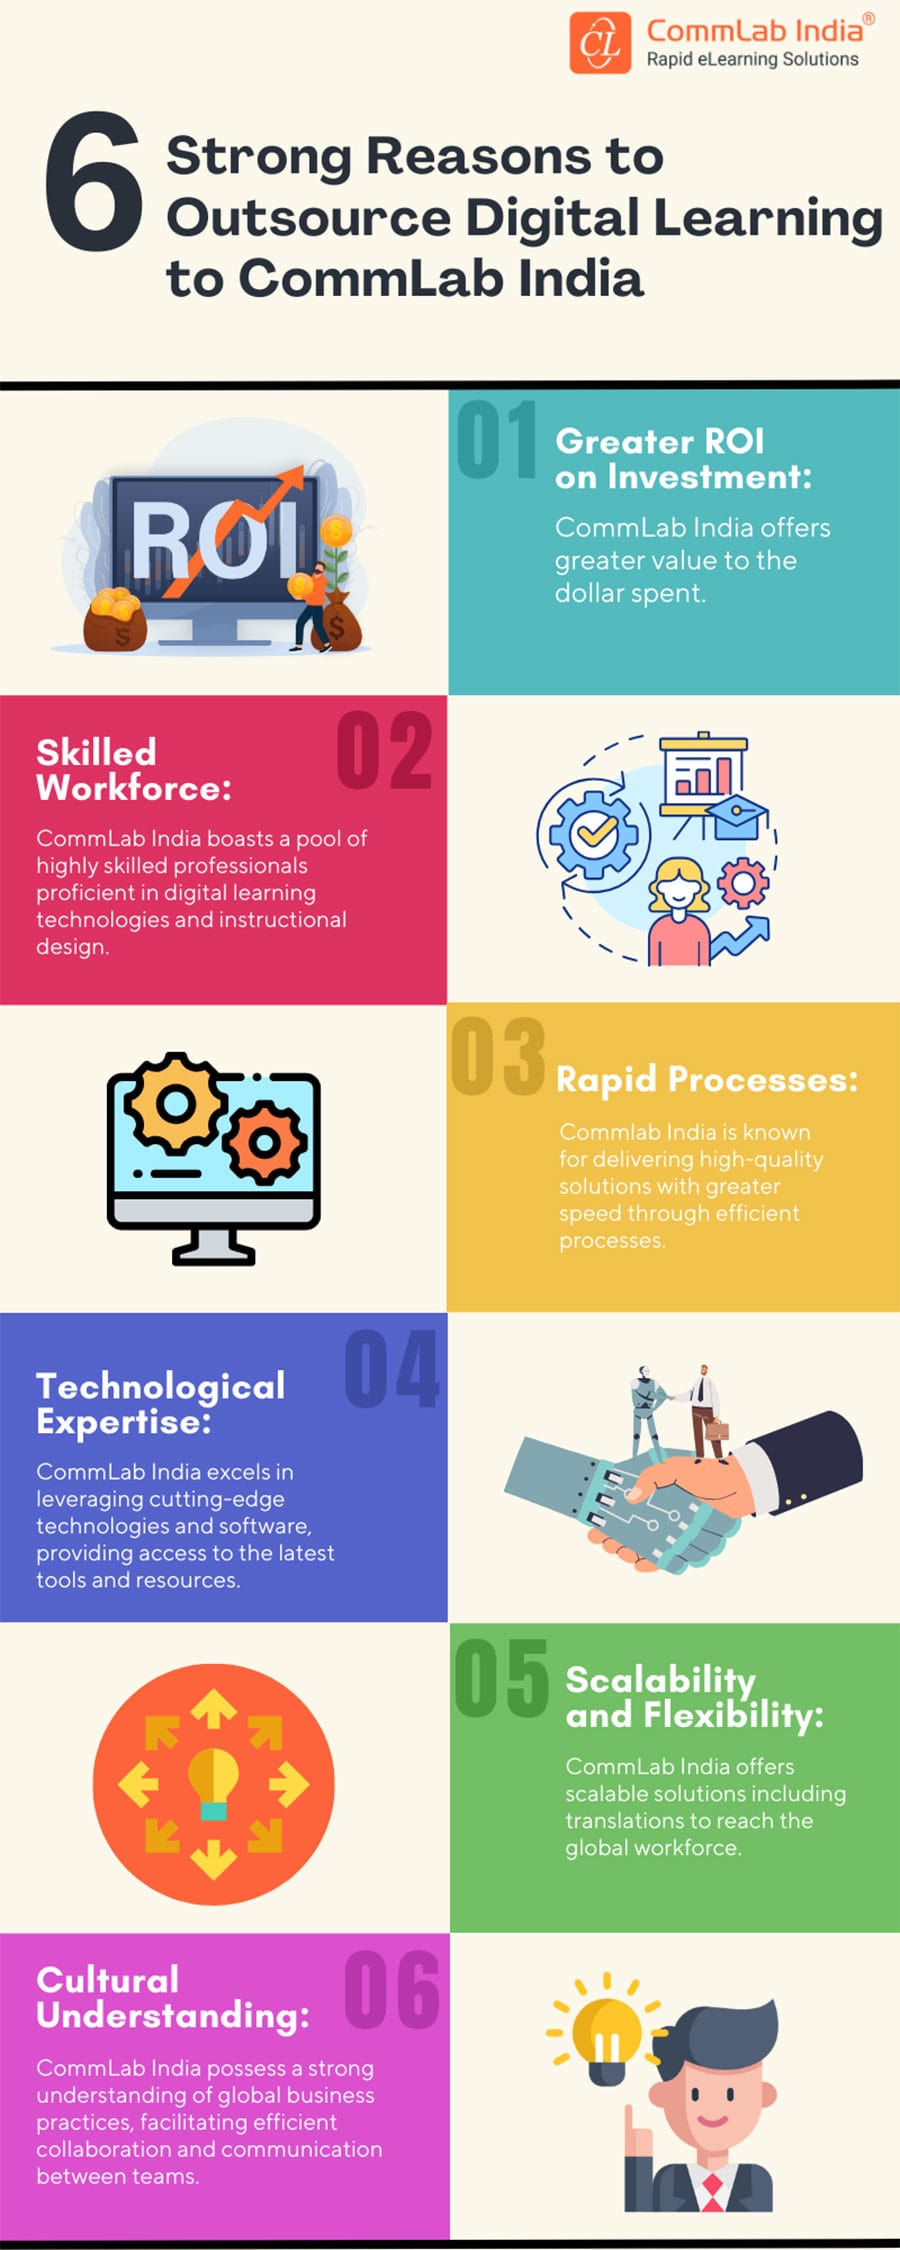 6 Strong Reasons to Outsource Digital Learning to CommLab India